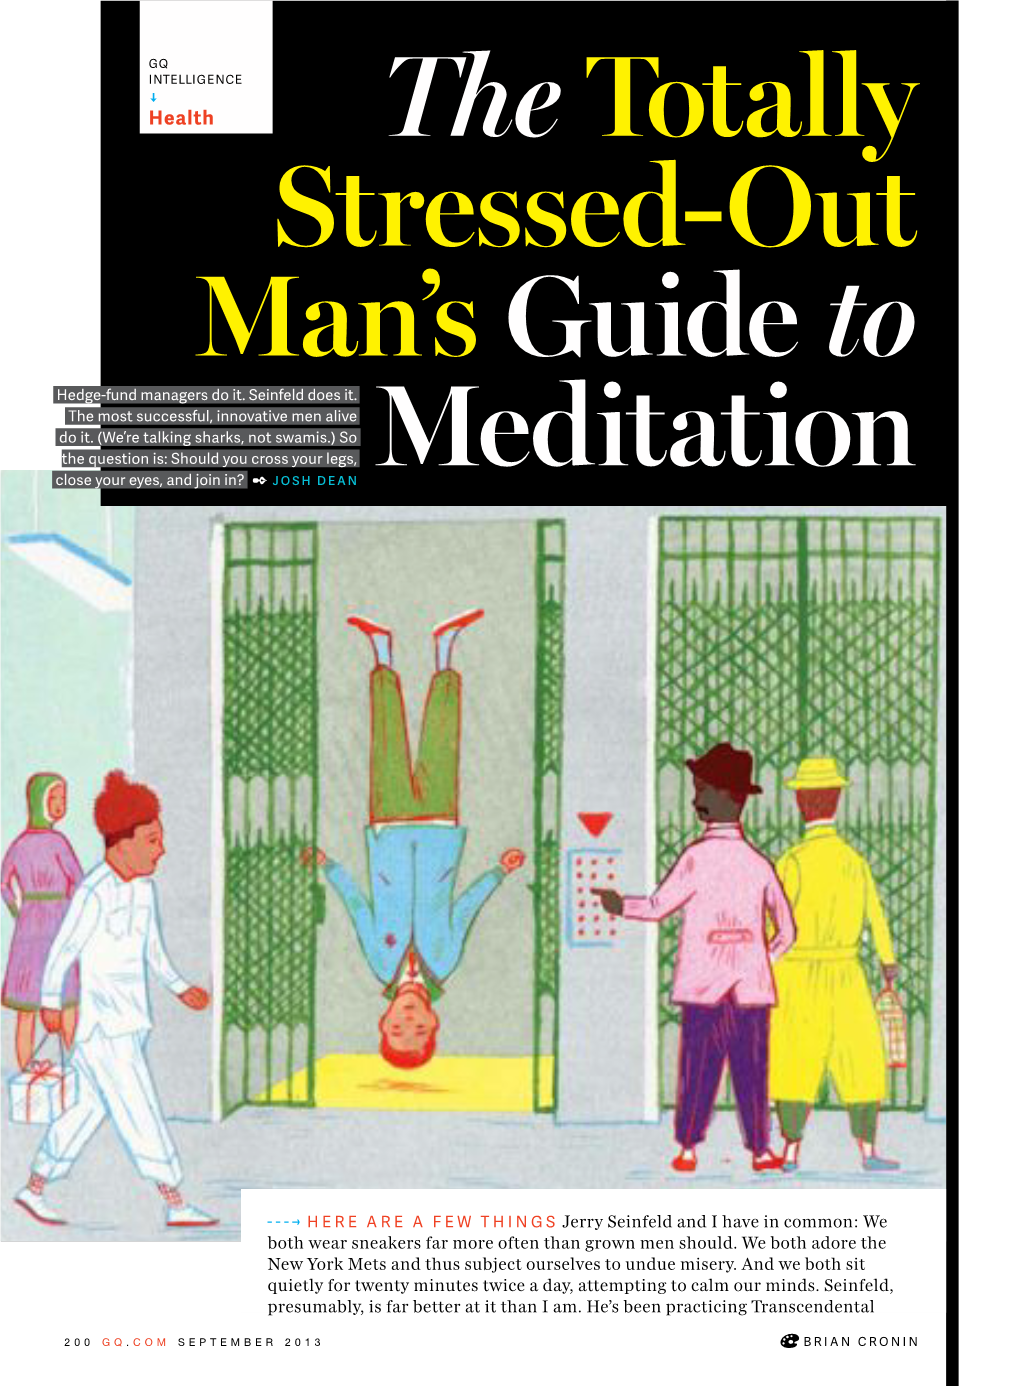 The Totally Stressed-Out Man's Guide to Meditation